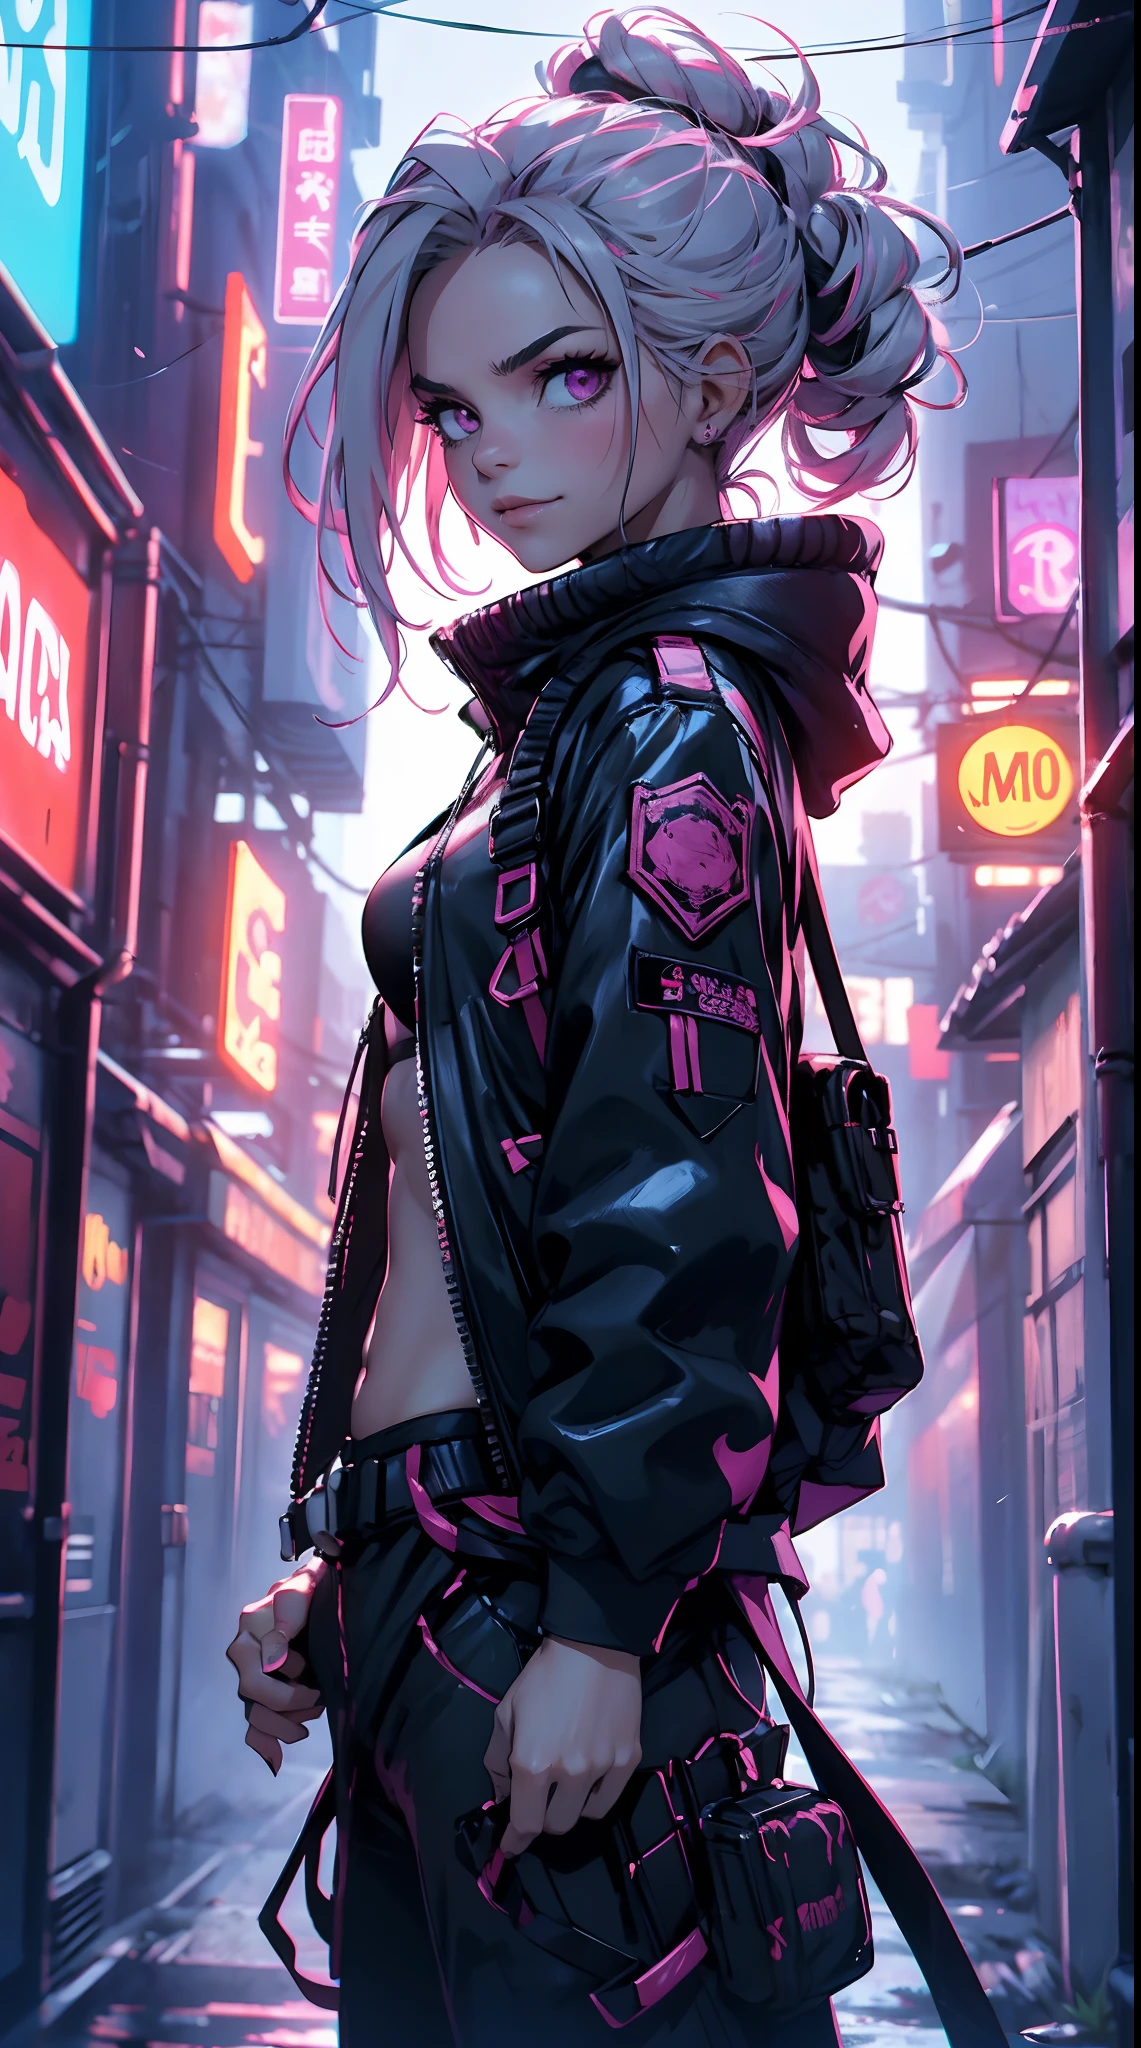 Beautiful woman, pink hair, spiky hair, pink eyes, Fairy Tail, Calles Cyberpunk en, Estilo Cyberpunk, Traje blanco Cyberpunk, tiene estilo Cyberpunk, Cyberpunk, cosplay completo, ultra HD quality, ((sharp face)), Official Art, handsome, adult male, 25 years old, walking down the street, evil smile, 1 ,